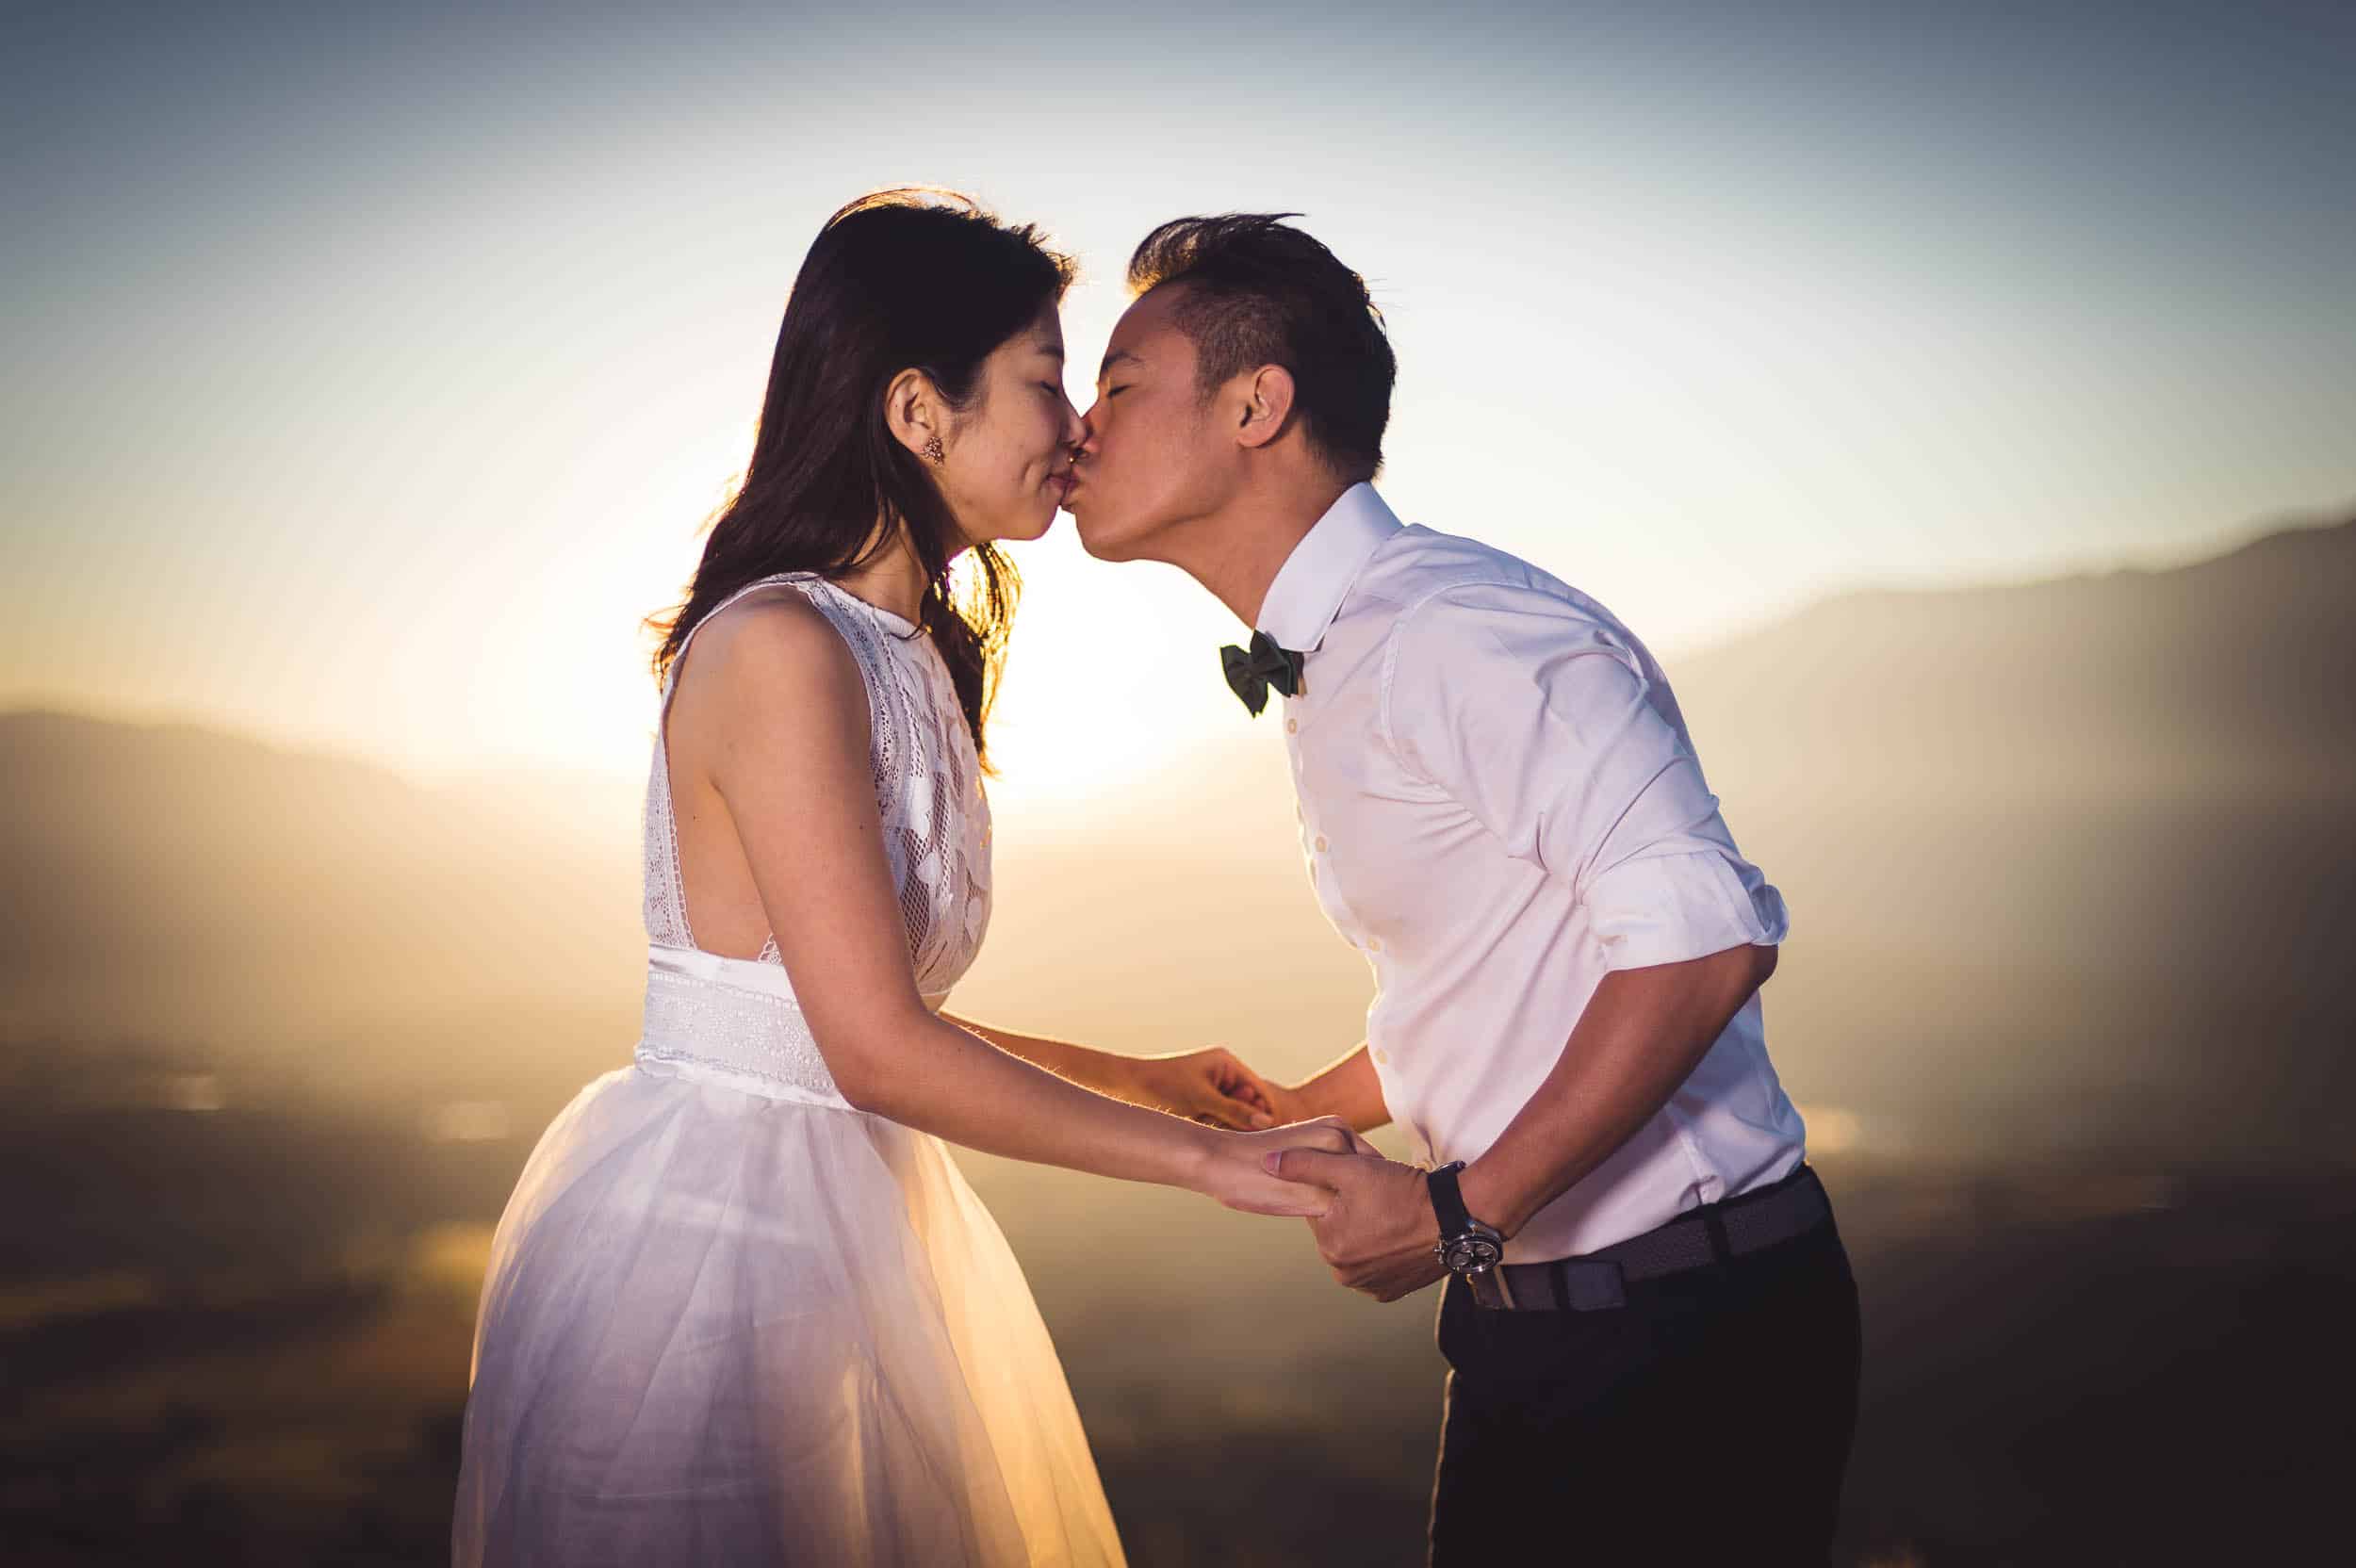 blog post featured image Sunrise Coronet Peak Pre Wedding Shoot Relaxed Natural Fun Queenstown Wedding Photography Photographer Coronet Peak Sunrise Pre-wedding shoot